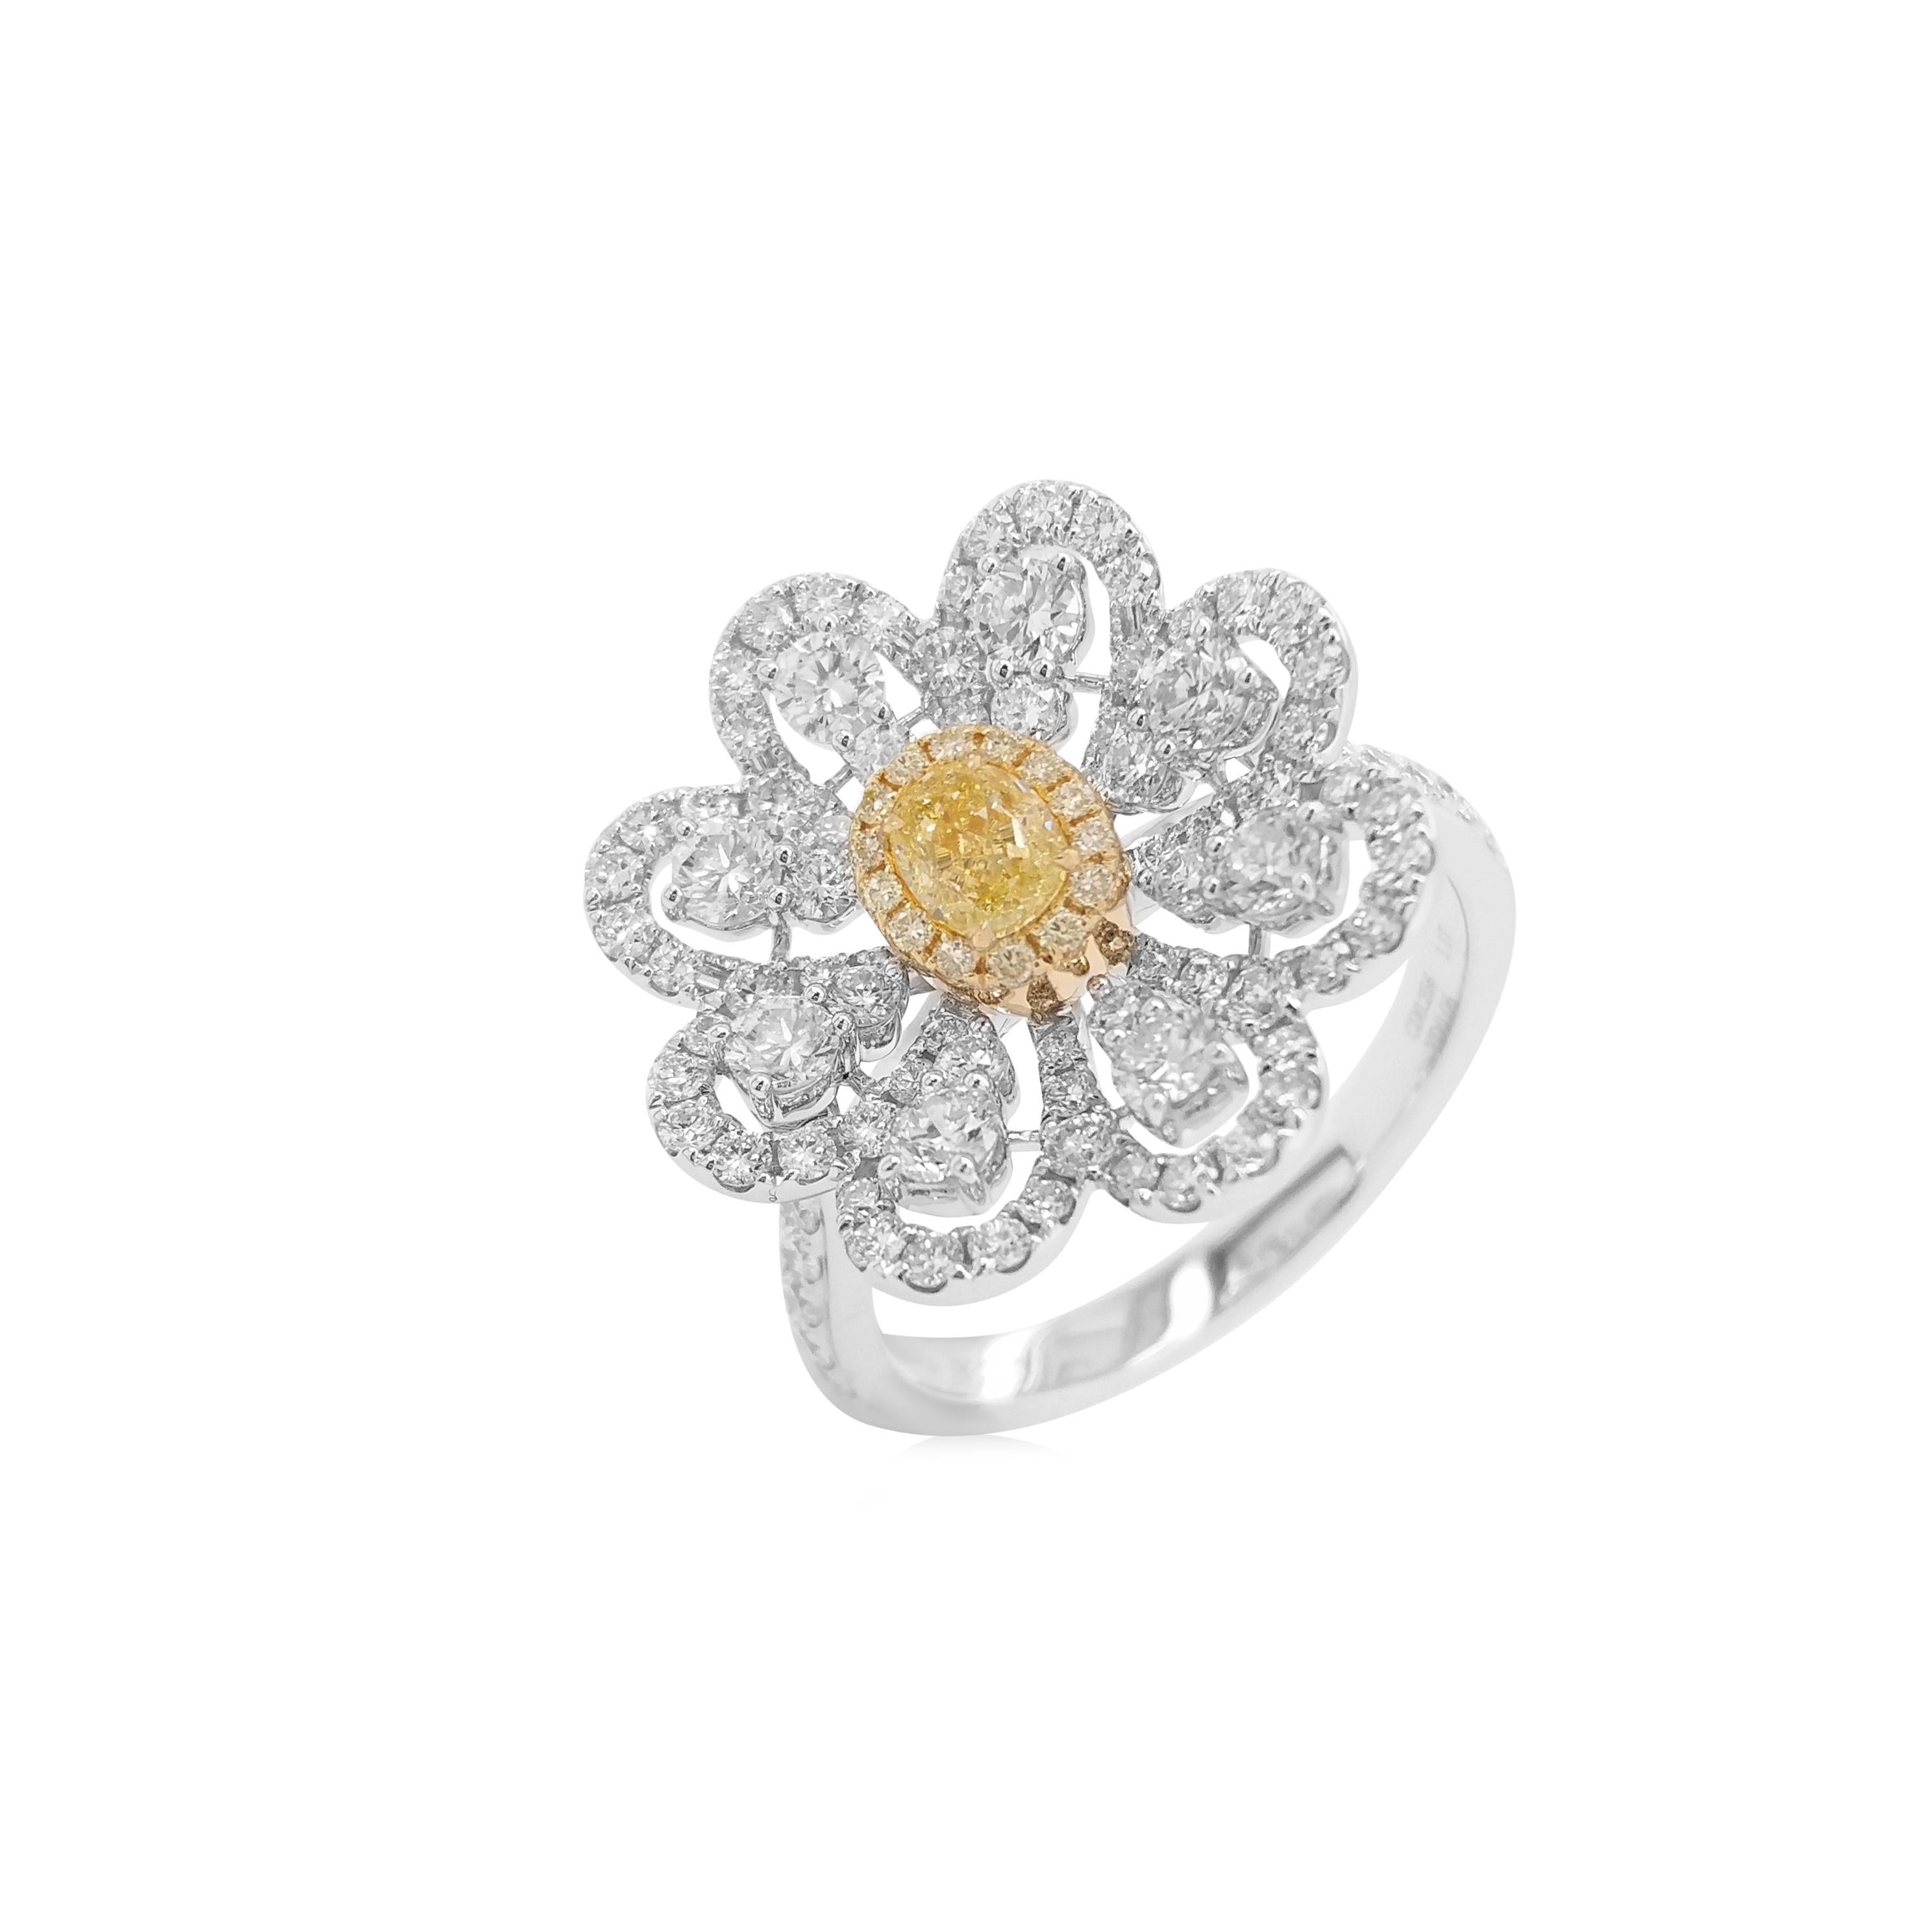 Natural Yellow Diamond Studded Ring with Round Brilliant cut white diamonds creating a flower-like design is a beautiful addition to your jewelry collection.
-	Natural Fancy Yellow diamond, 0.256 carats (CGL, Japan Certified)
-	Round Brilliant Cut